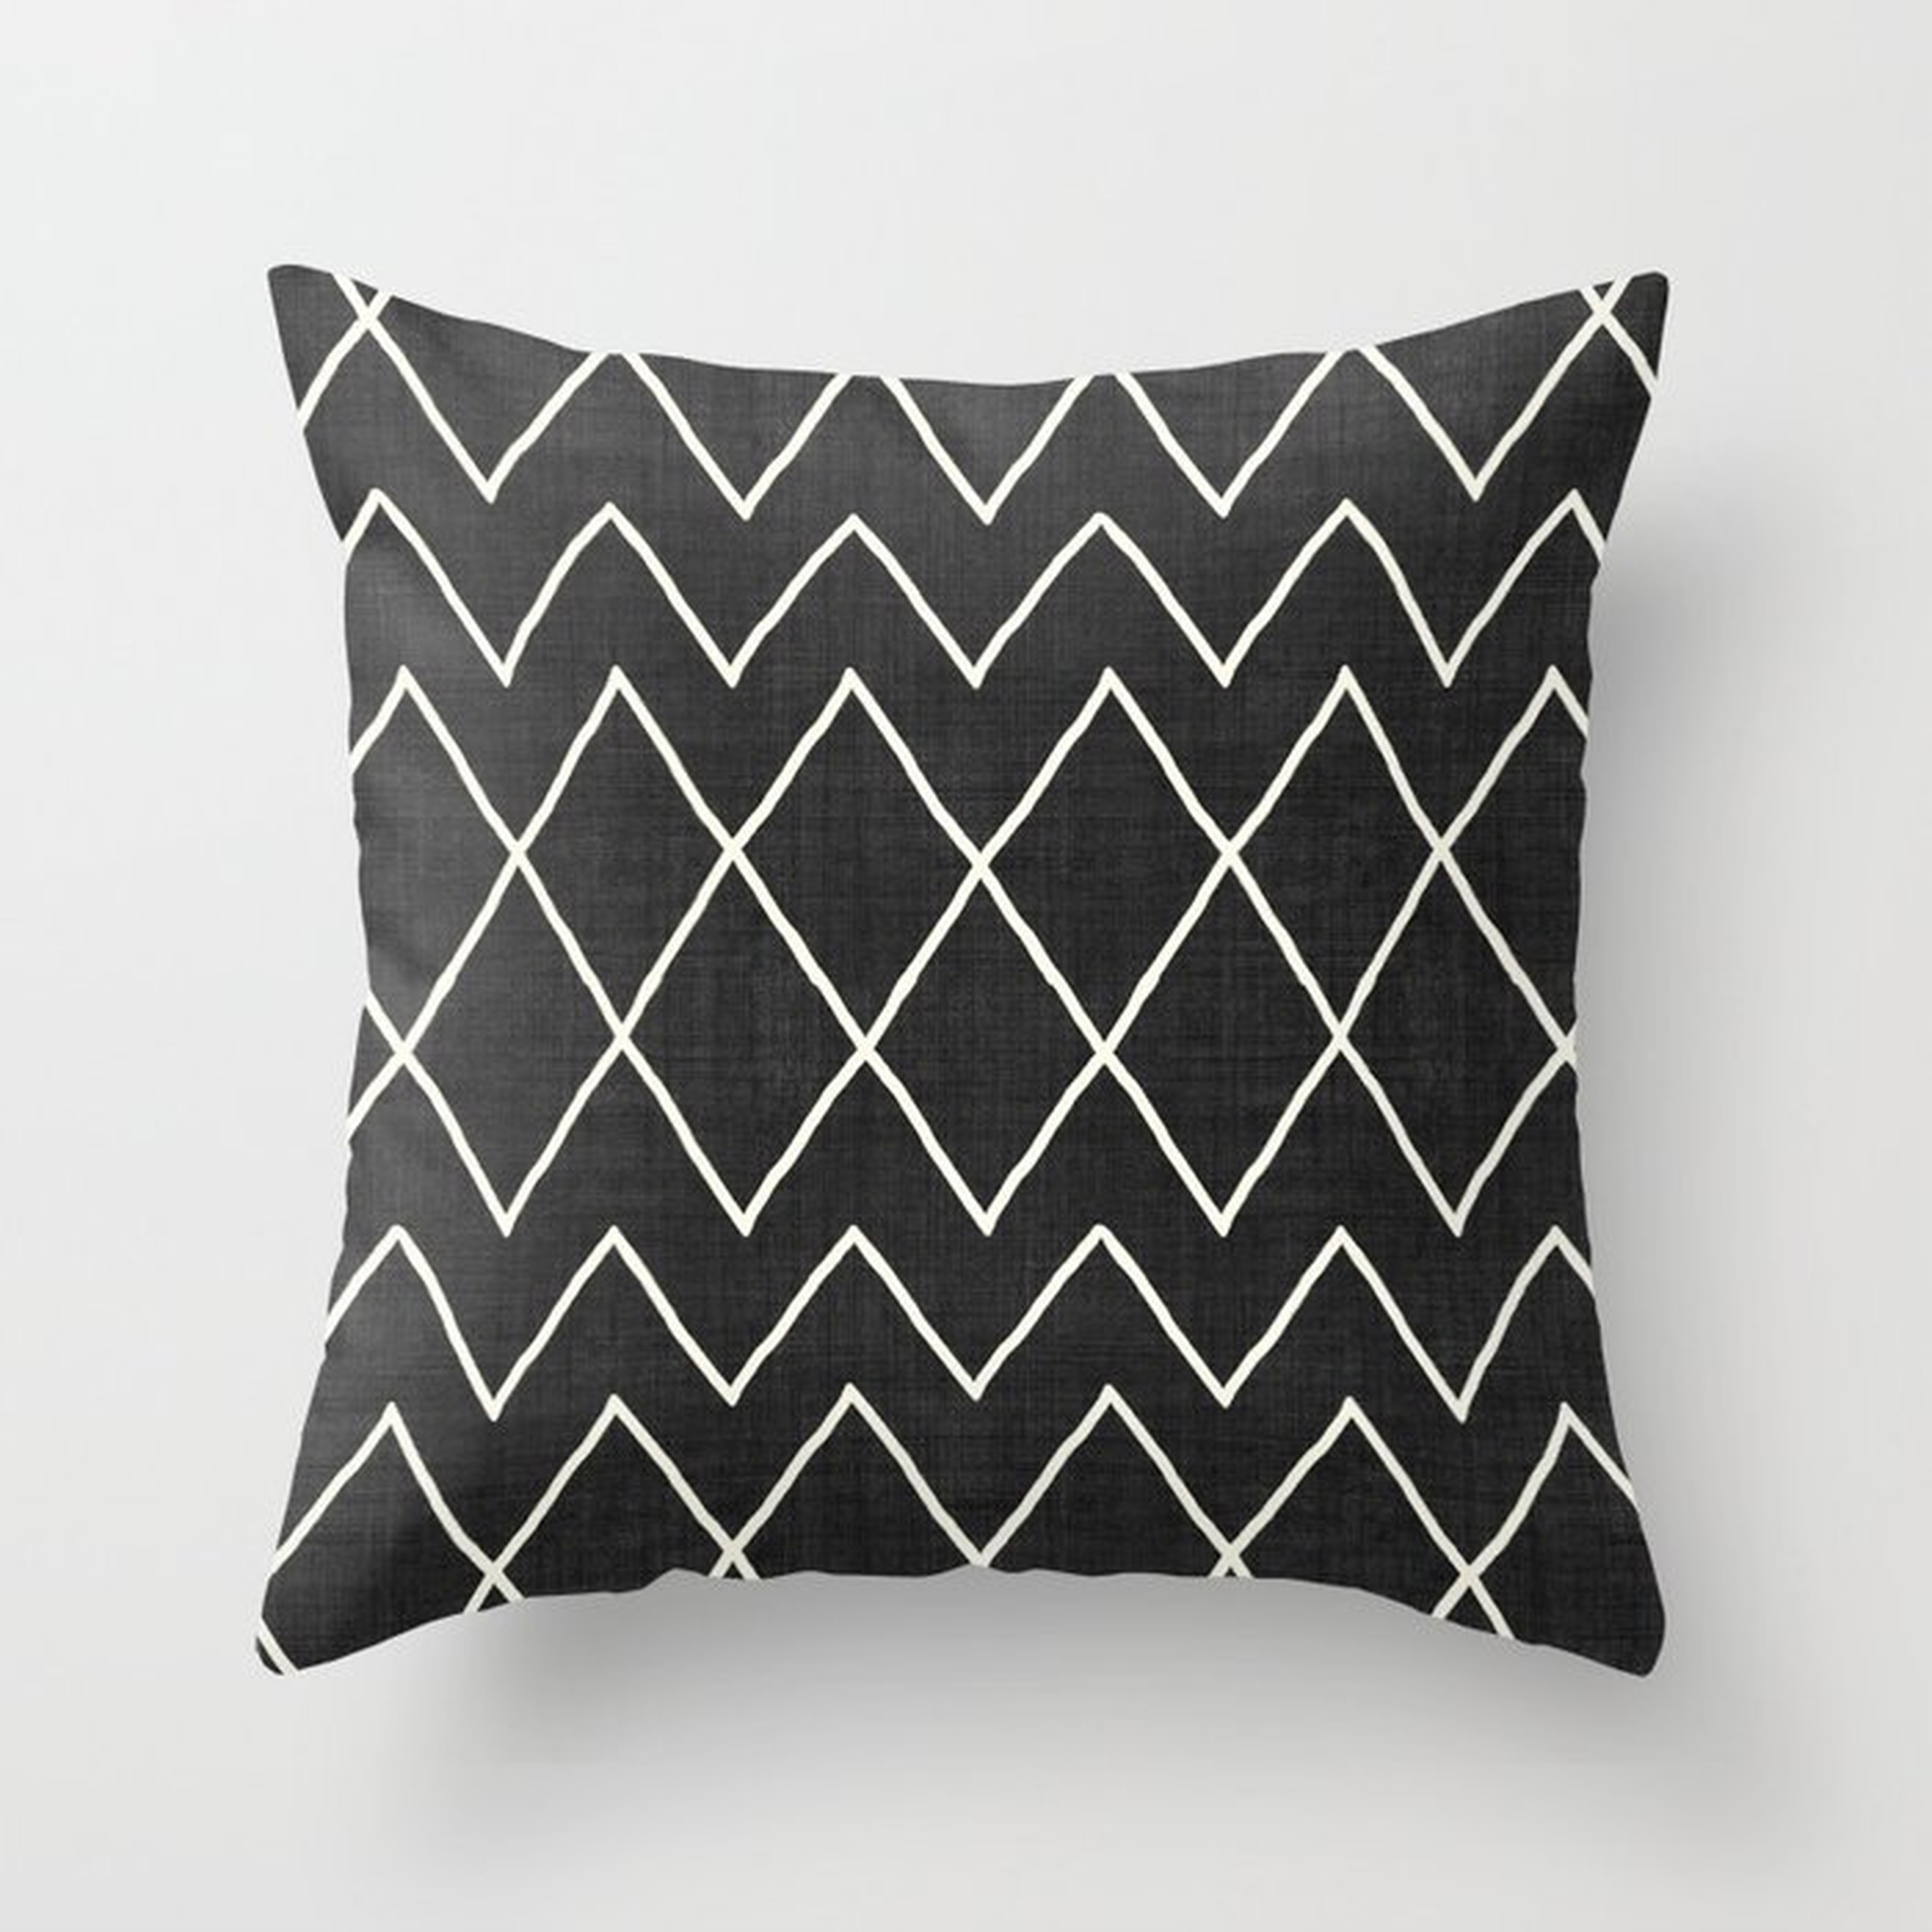 Avoca In Black And White Throw Pillow by House Of Haha - Cover (18" x 18") With Pillow Insert - Outdoor Pillow - Society6